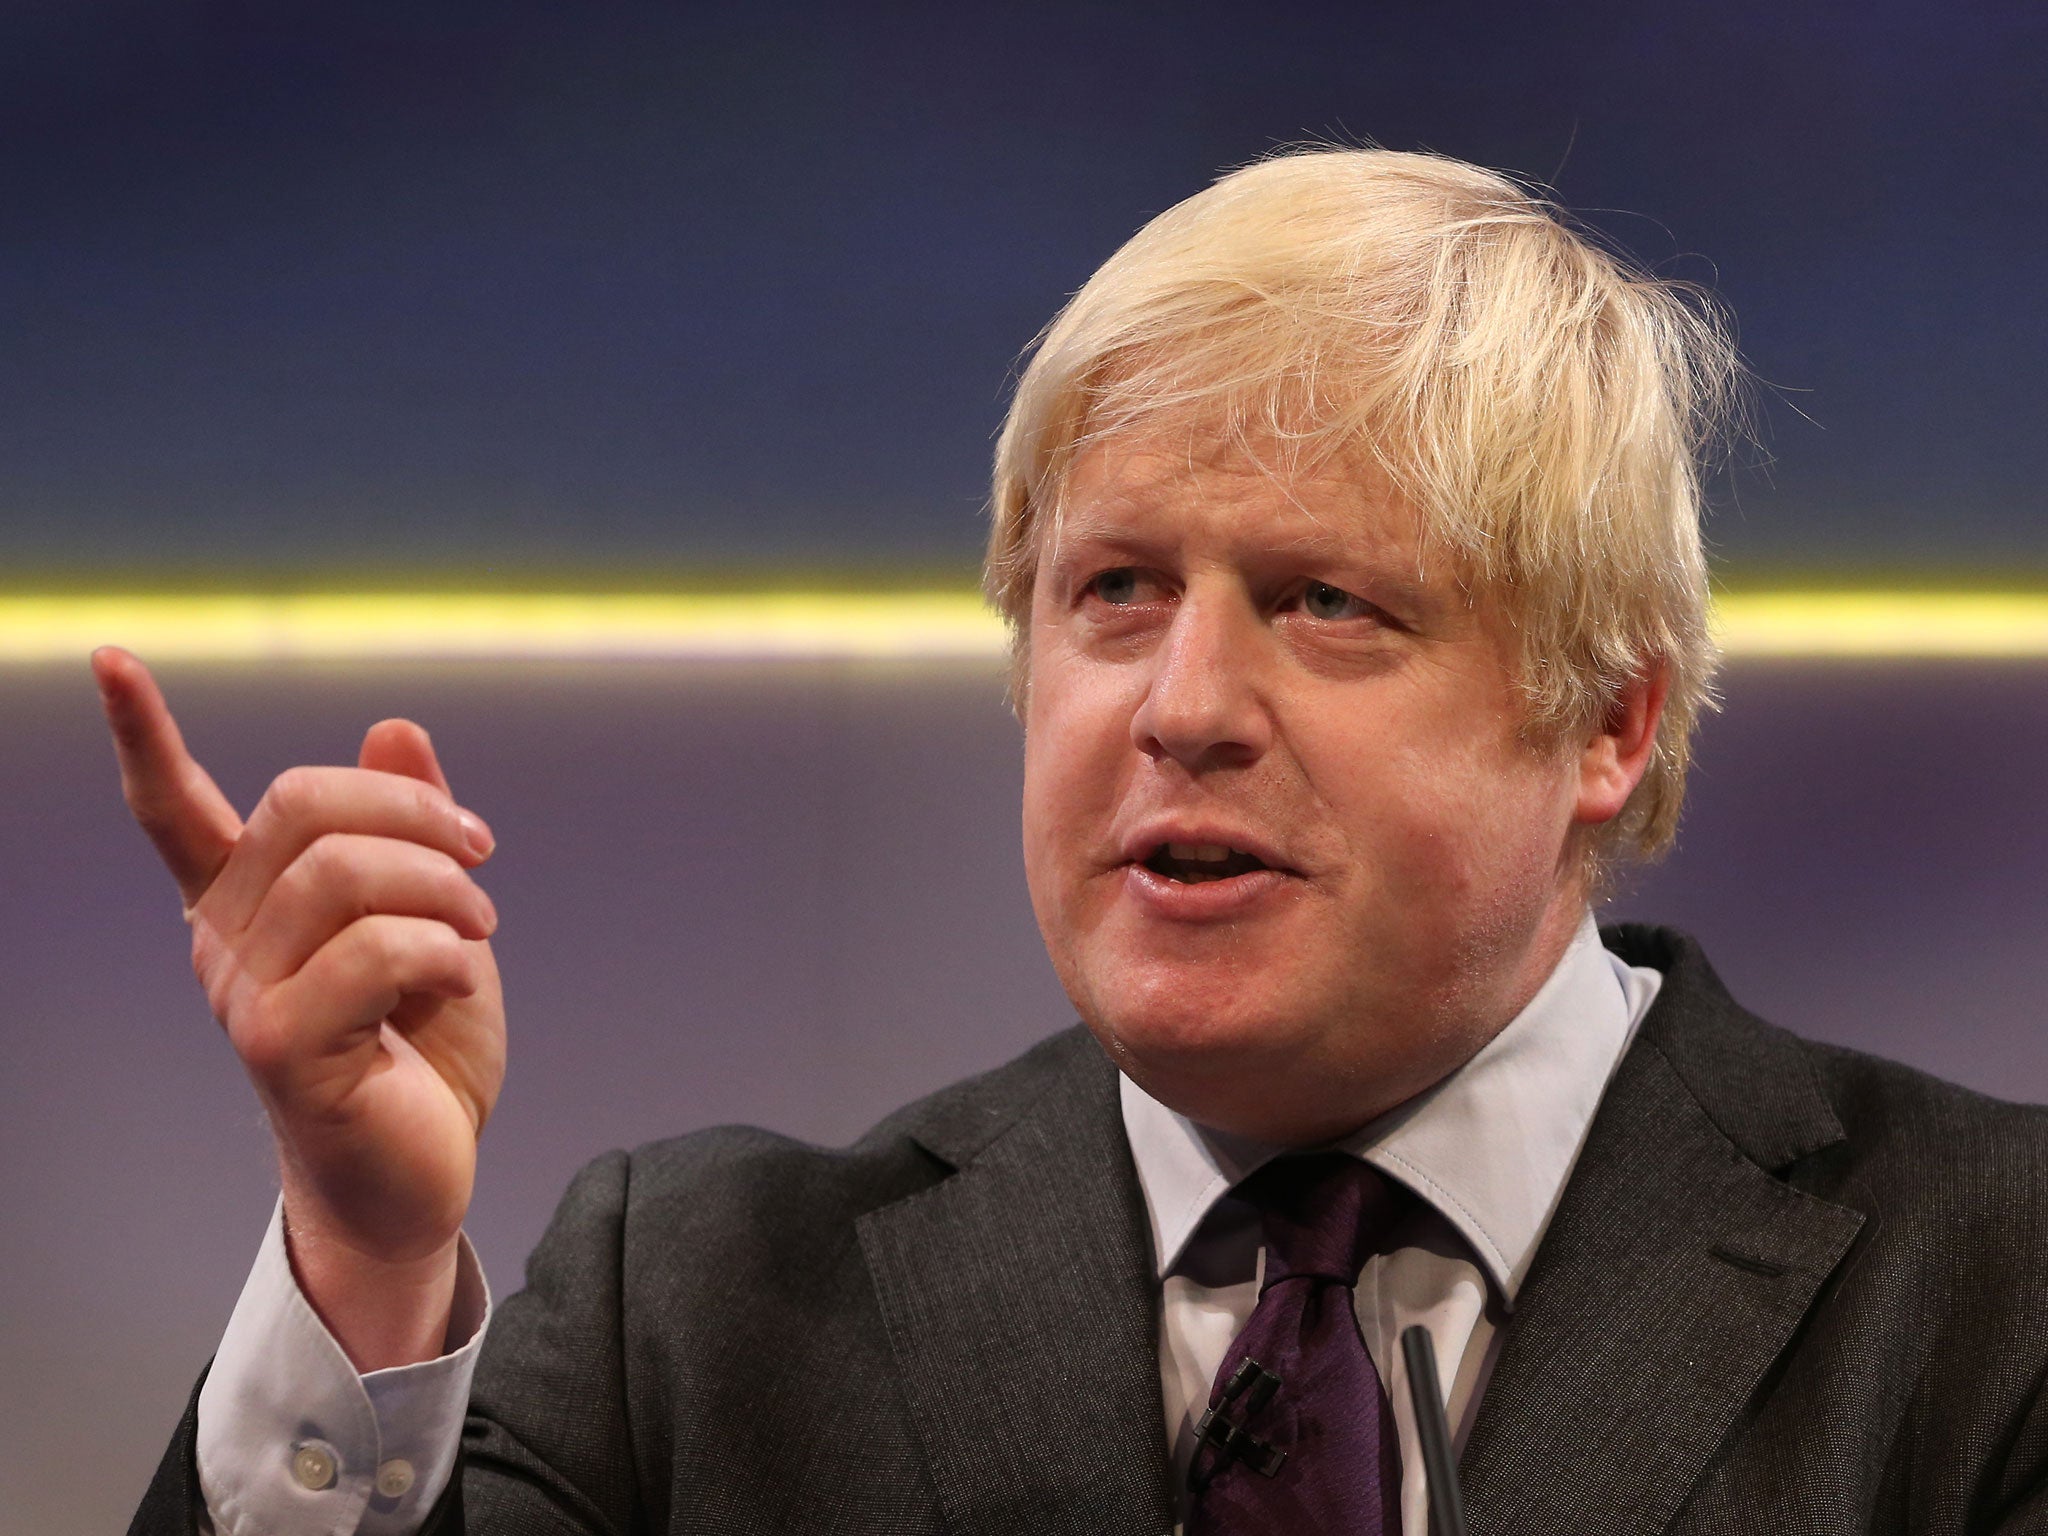 London Mayor Boris Johnson speaks at the Confederation of British Industry's (CBI) annual conference on November 19, 2012 in London, England. The United Kingdom's business leaders have gathered at The Grosvenor House Hotel for their yearly one day confere